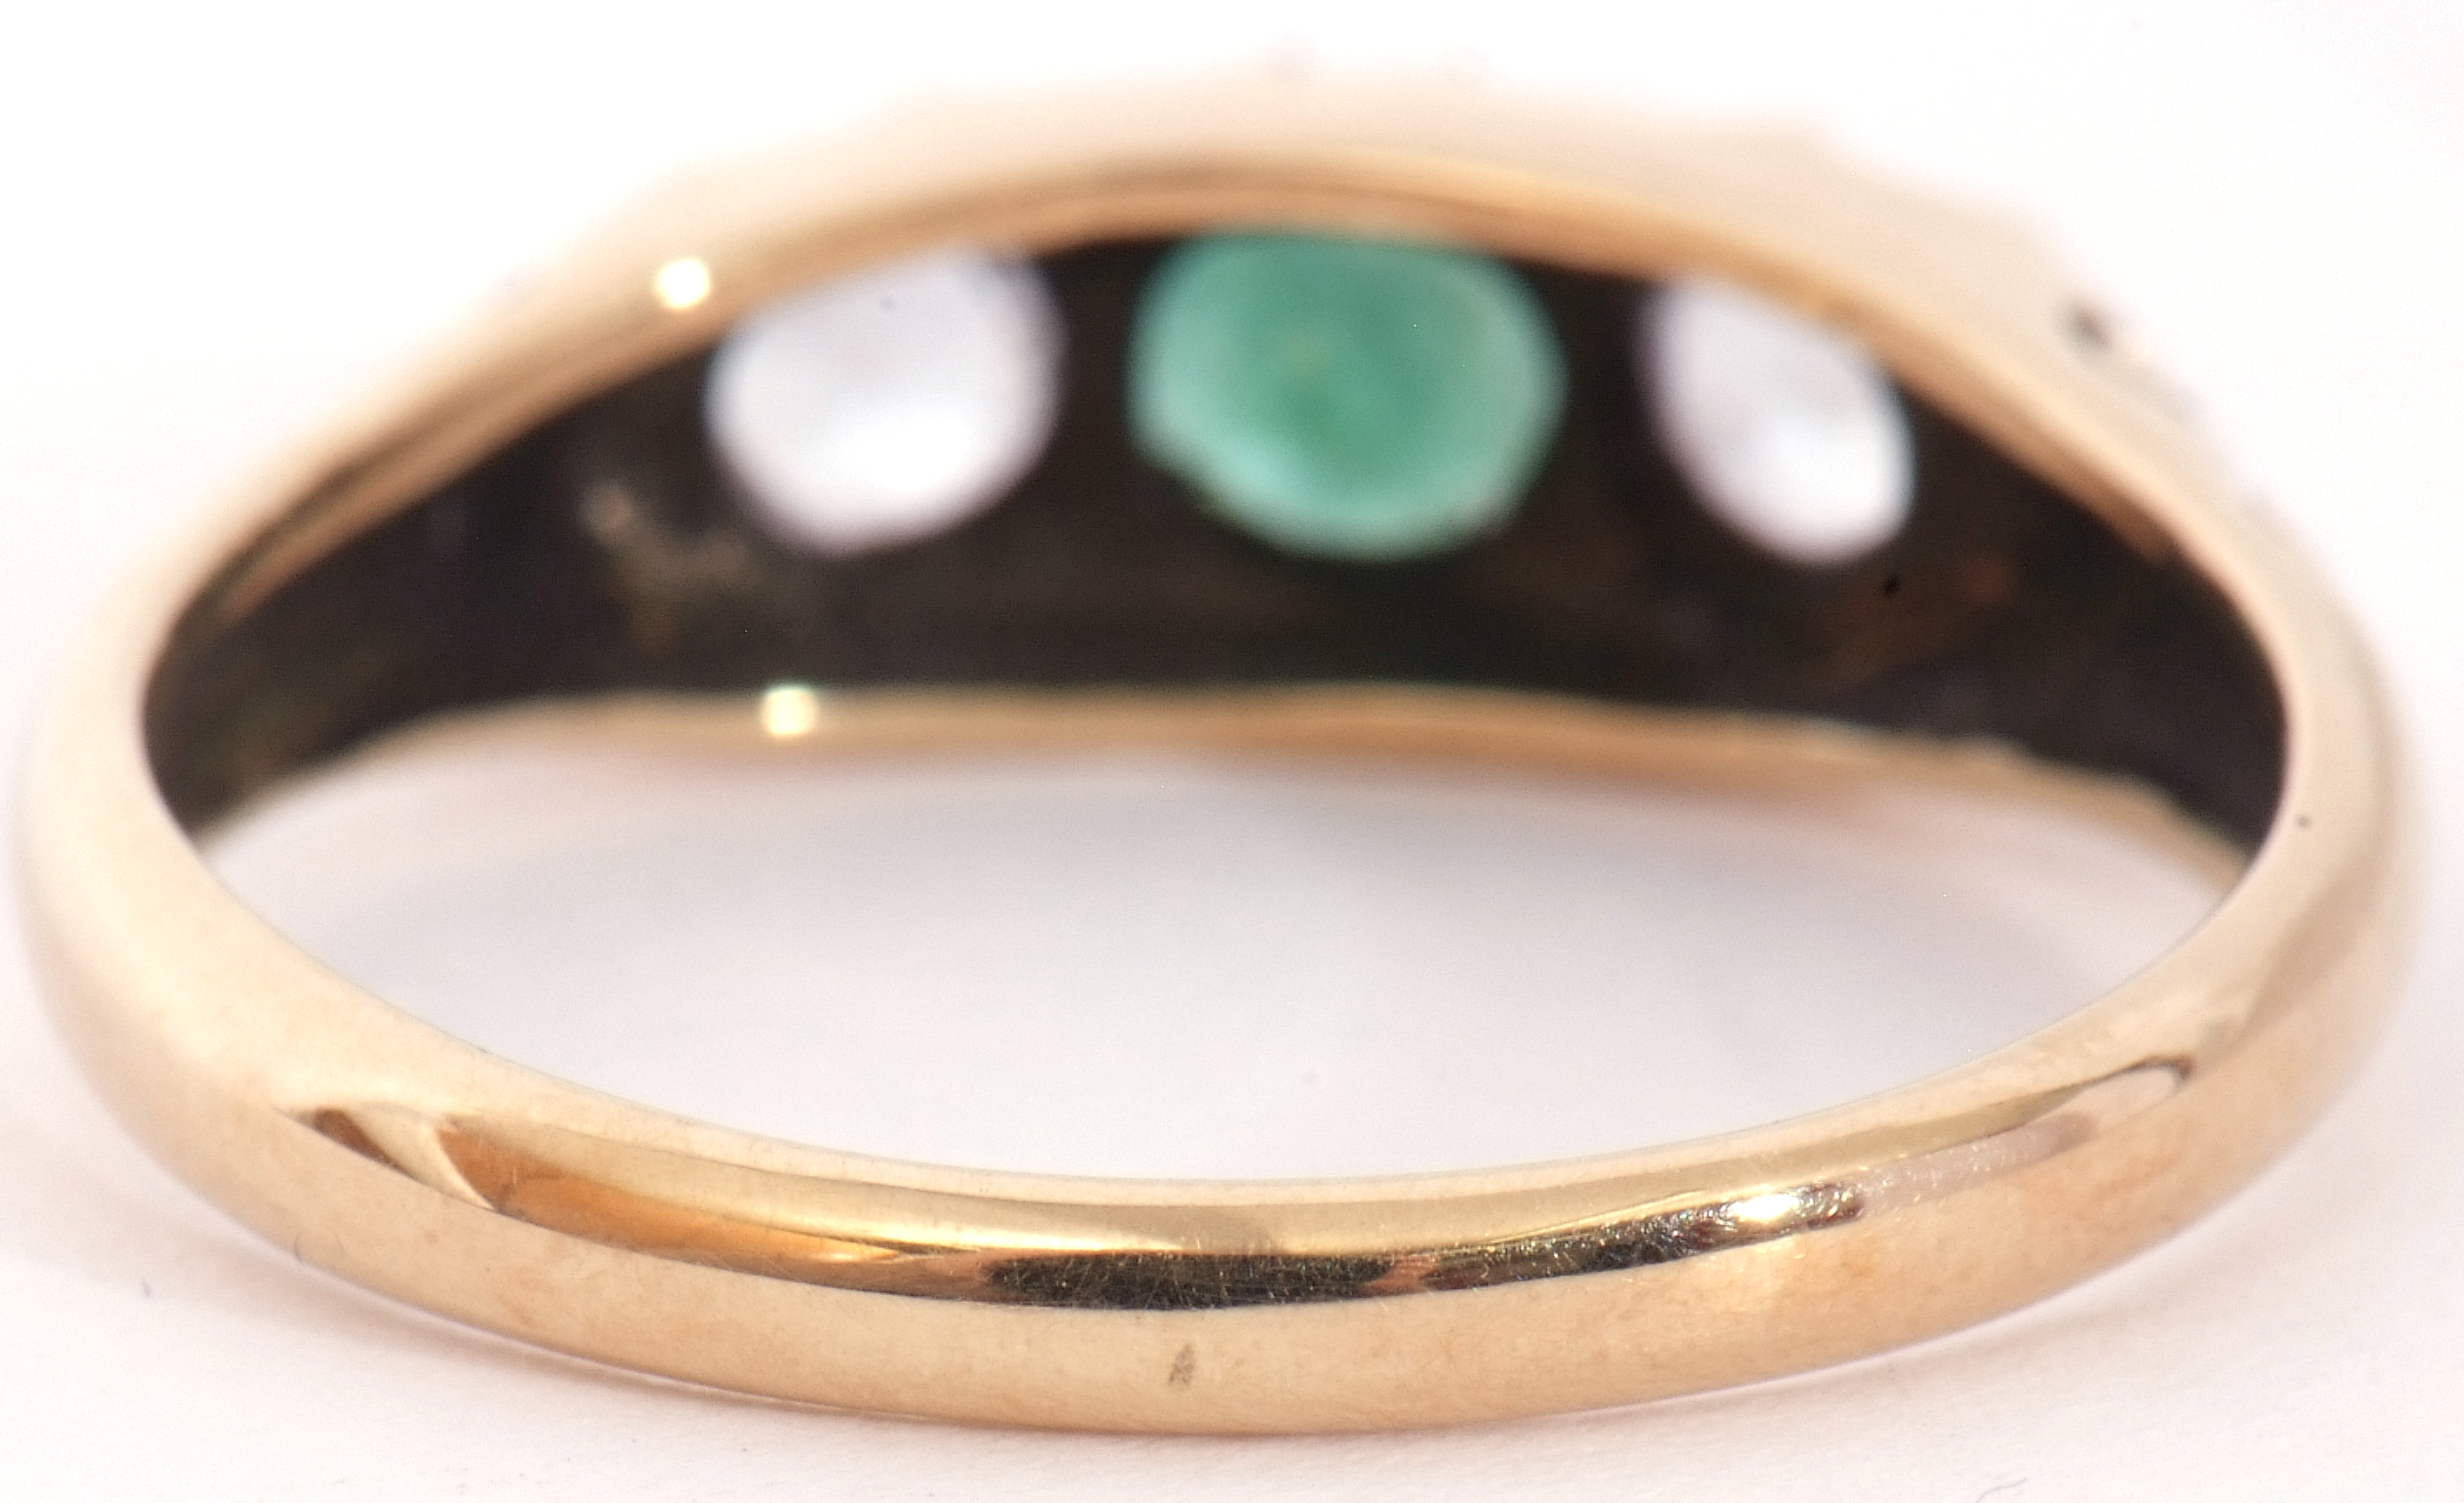 Modern 9ct gold paste set ring centring a green coloured stone between two pastes - Image 4 of 10